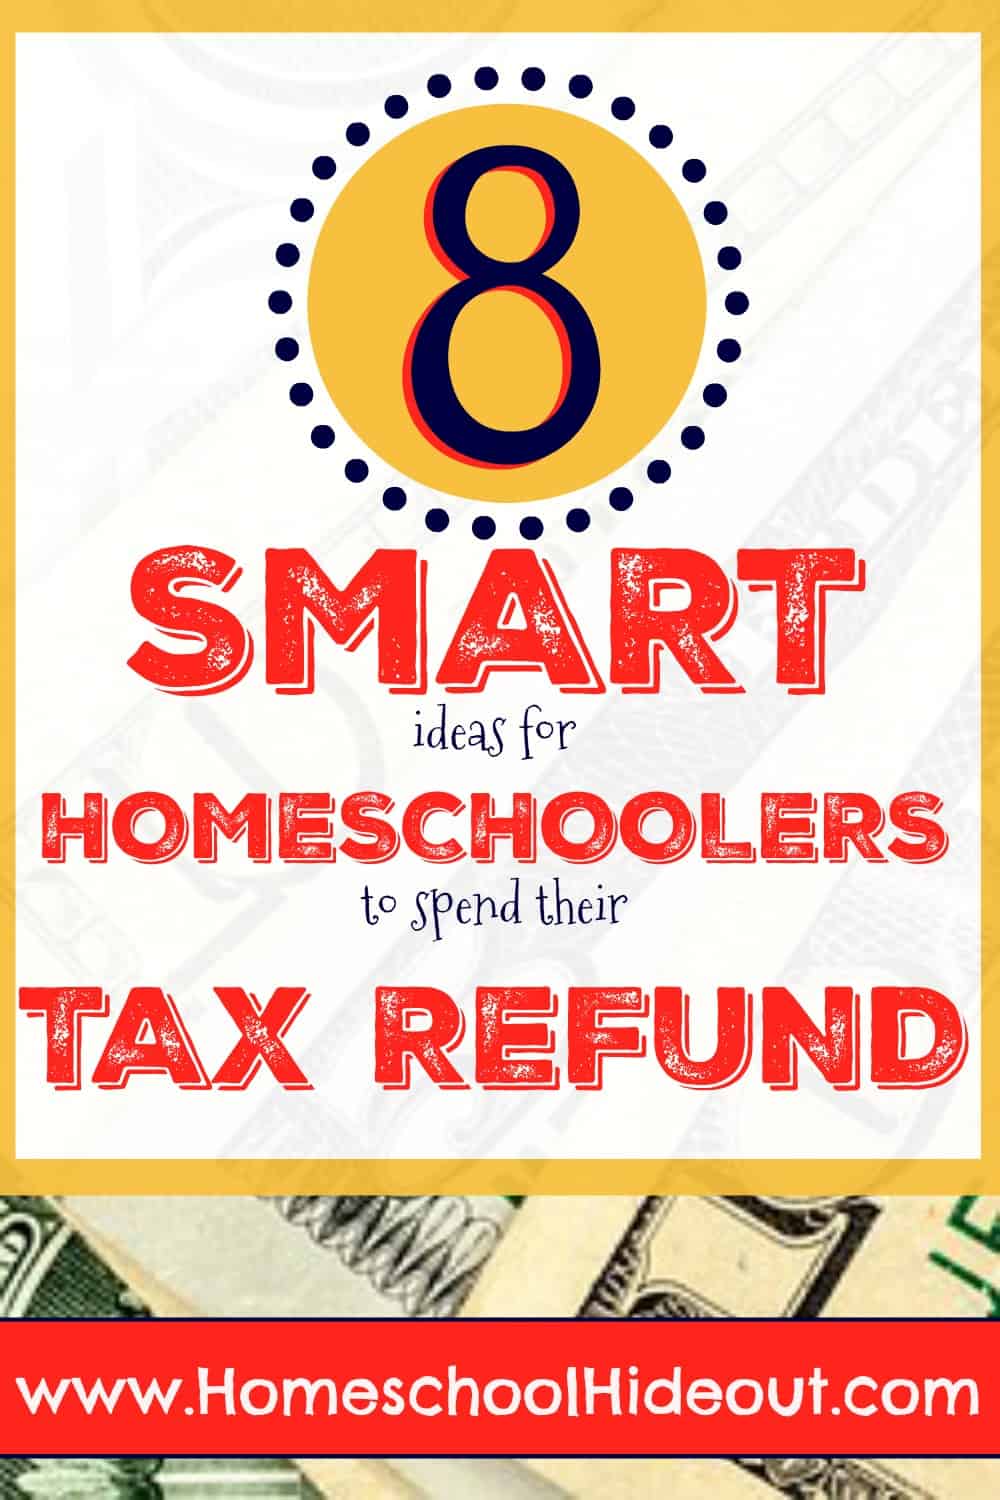 Smart ideas to help homeschoolers spend their tax refunds wisely! #4 is a MUST-DO!